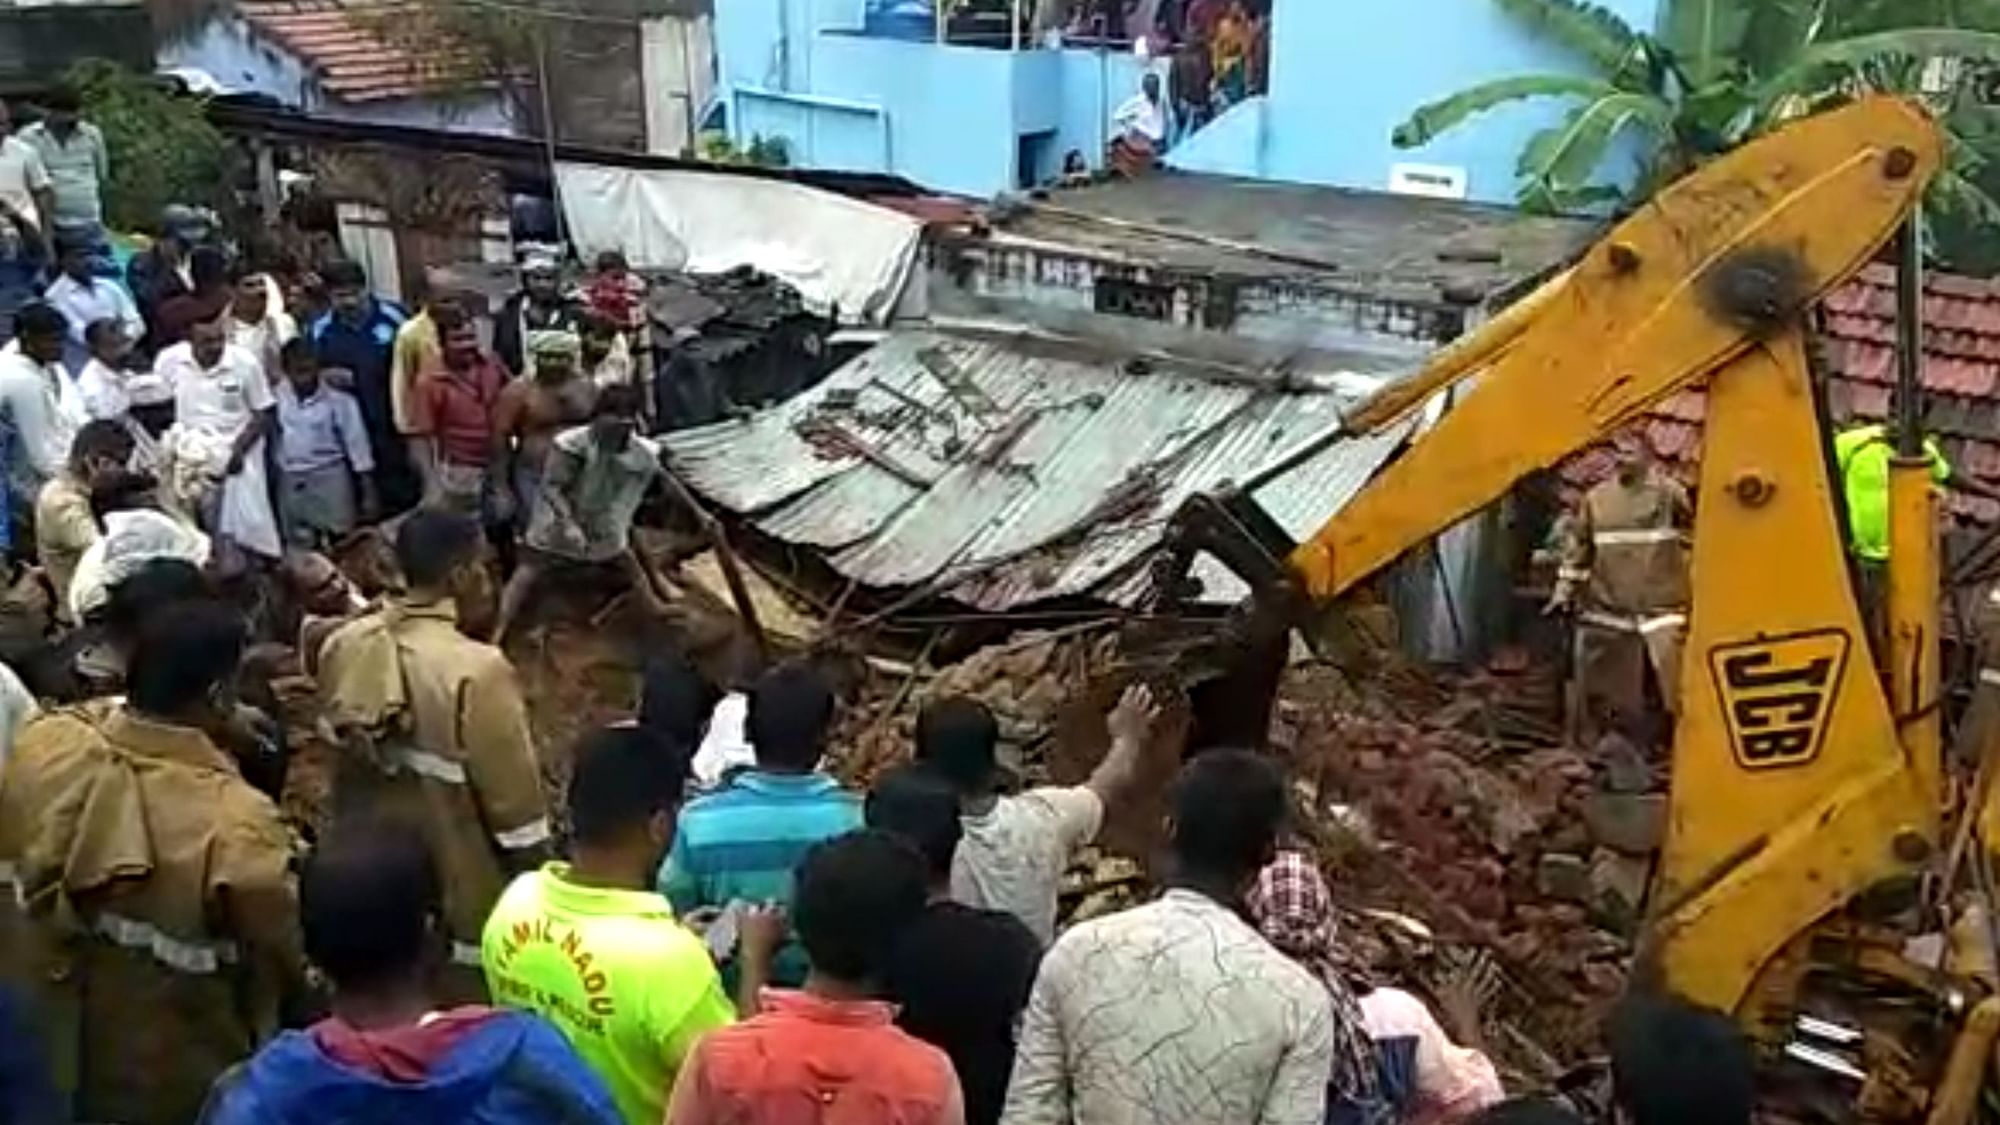 17 people were killed after a wall collapsed in a village in Coimbatore in Tamil Nadu.